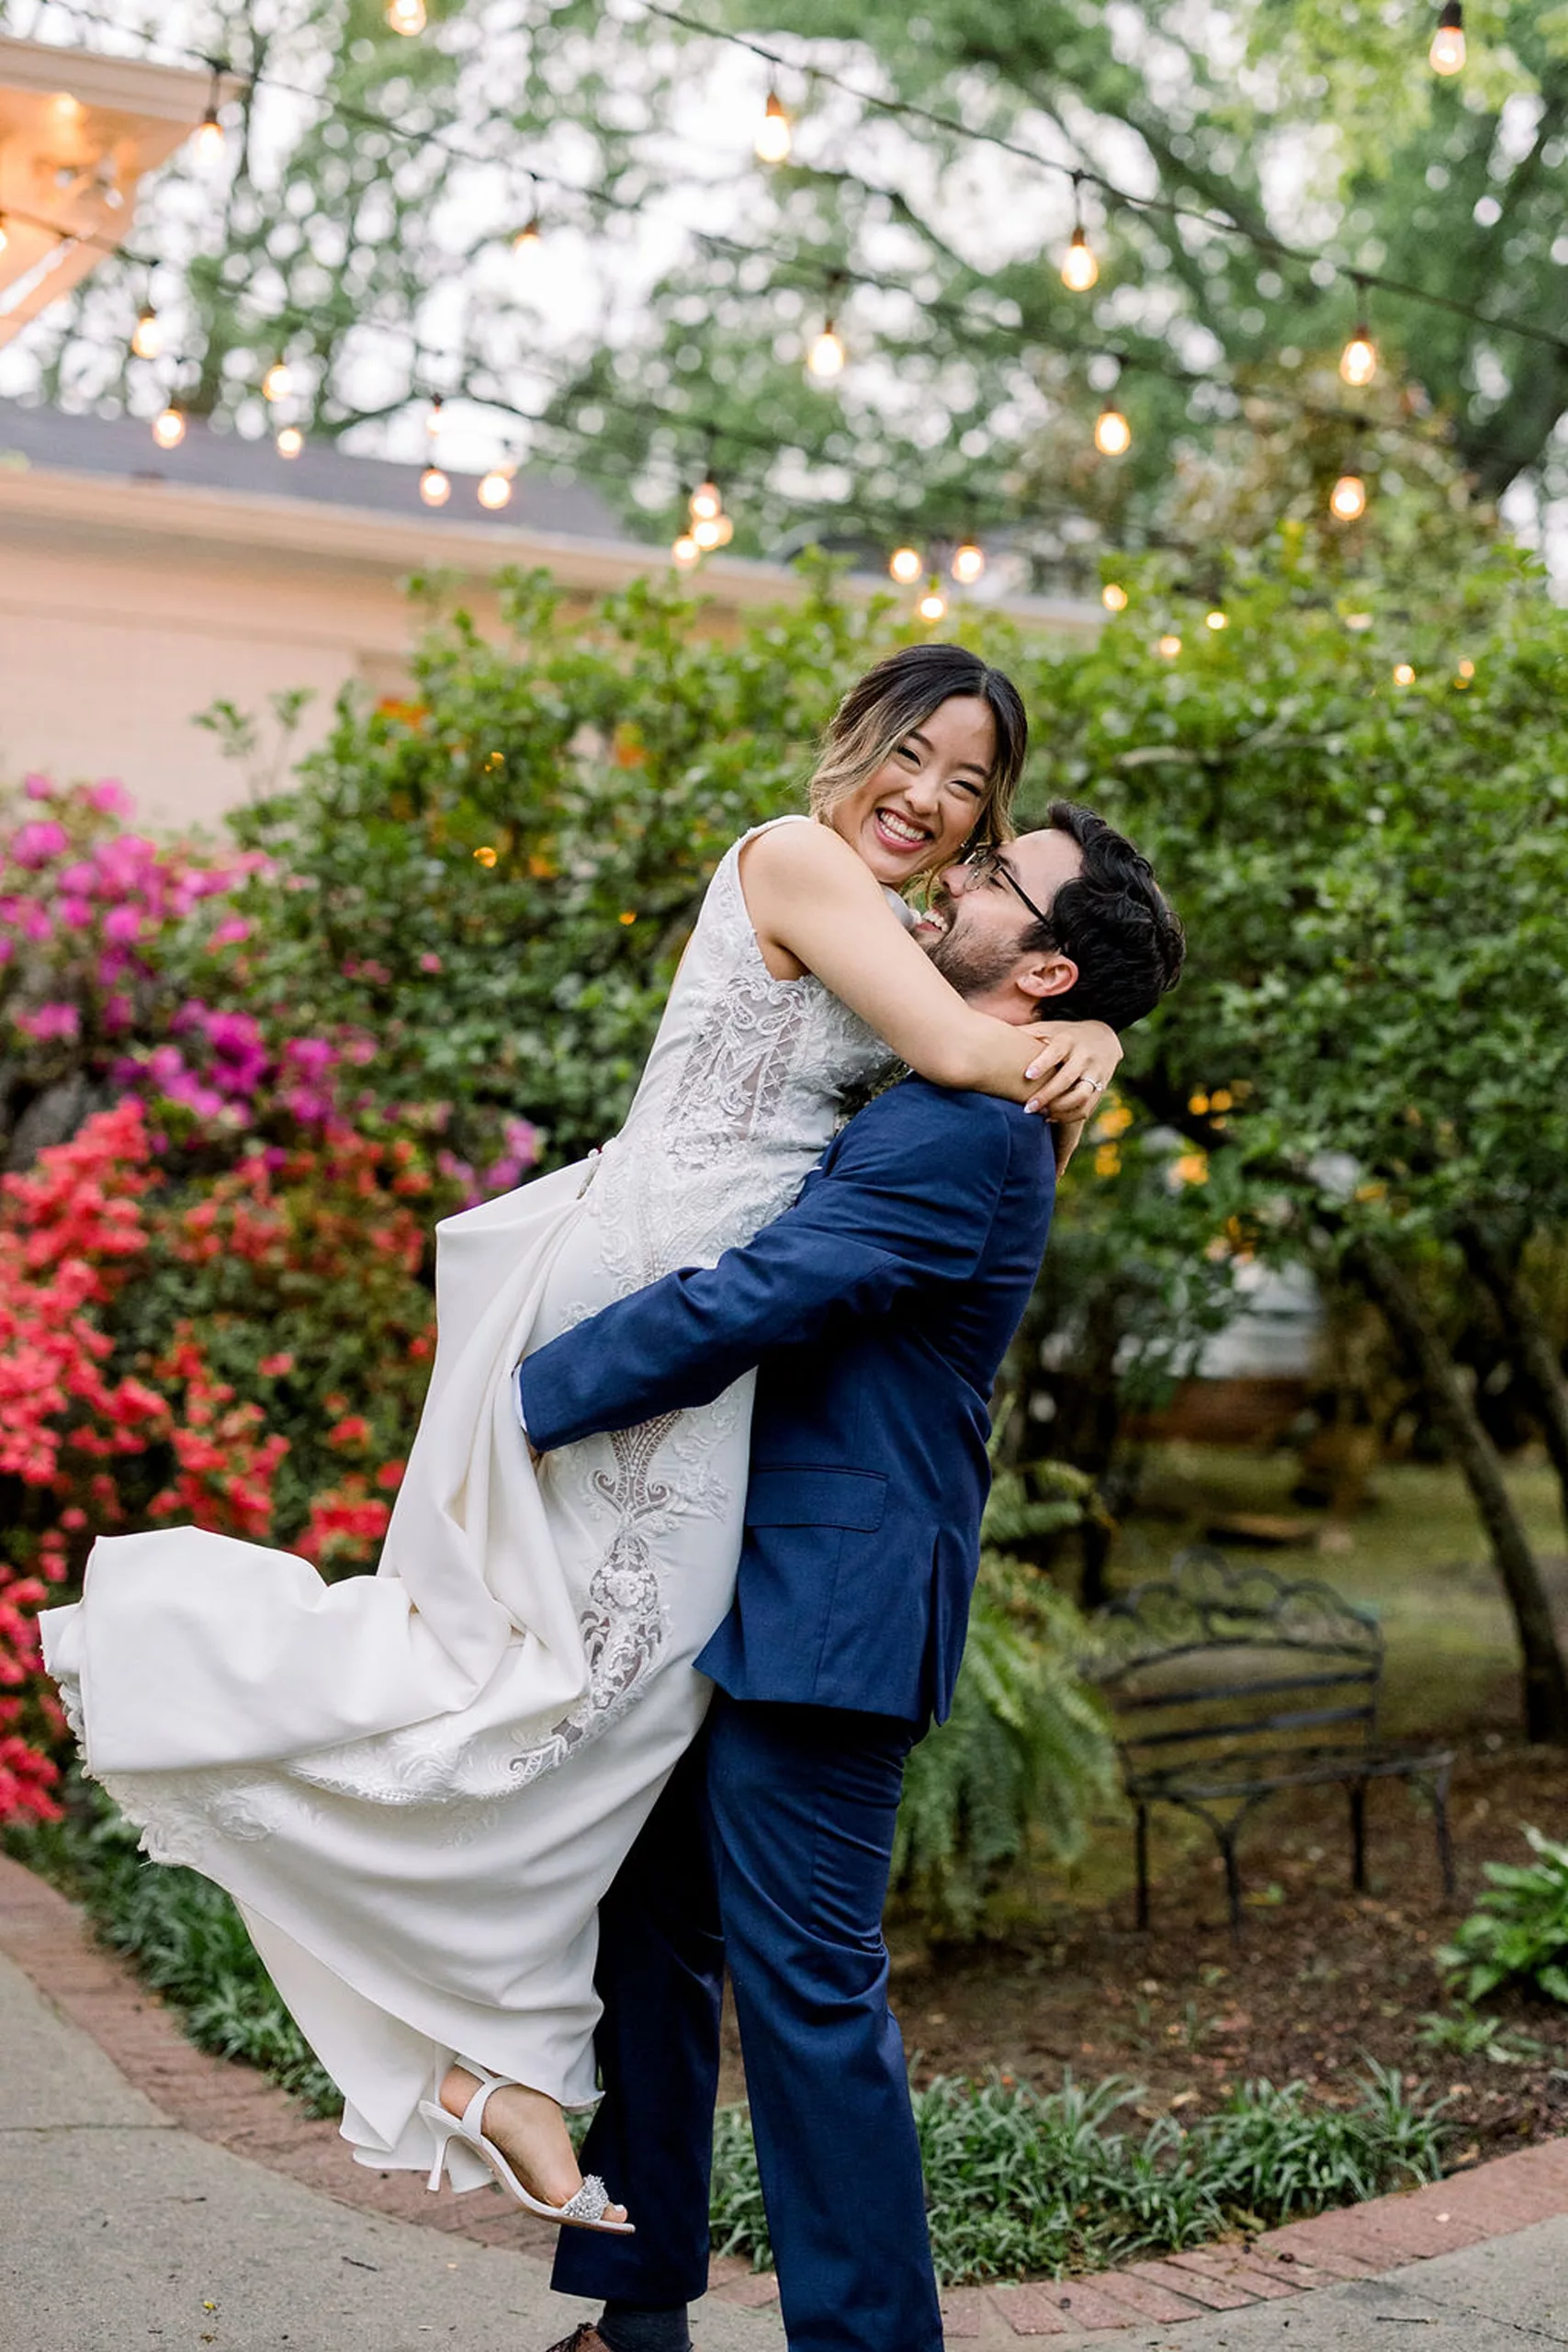 A groom in a blue suit lifts and laughs with his bride in a flower garden at a payne-corley house wedding